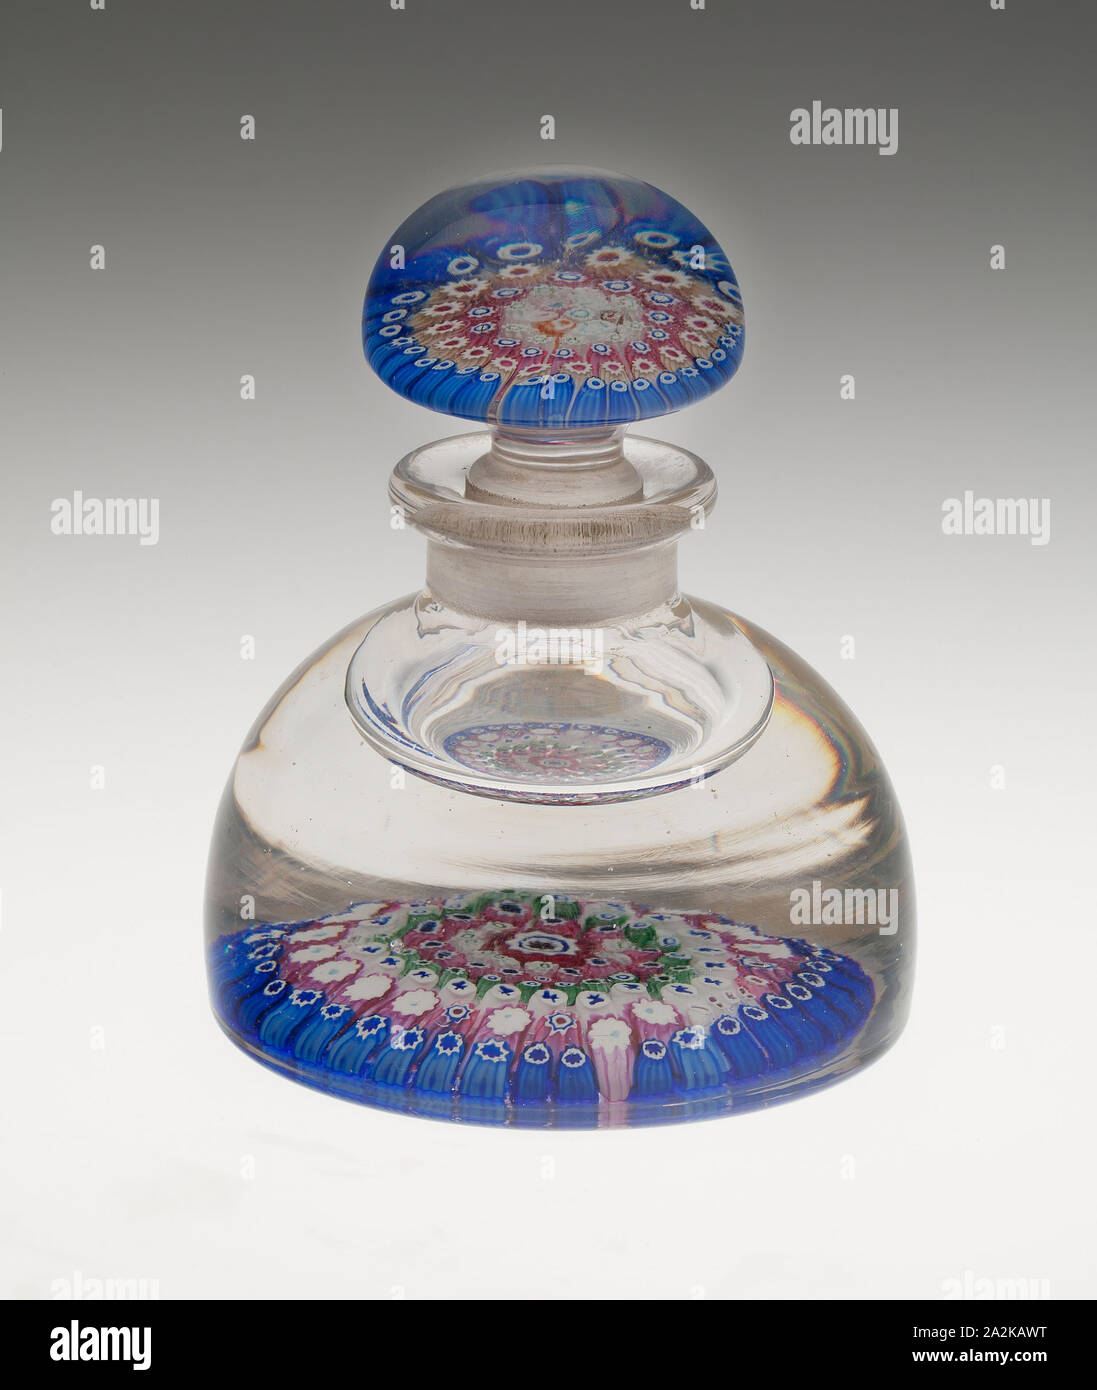 Inkwell, 1848, Whitefriars Glasshouse, English, founded late 17th century, London, Glass, blown with millefiori canes, 14.6 x 11.9 cm (5 3/4 x 4 11/16 in Stock Photo